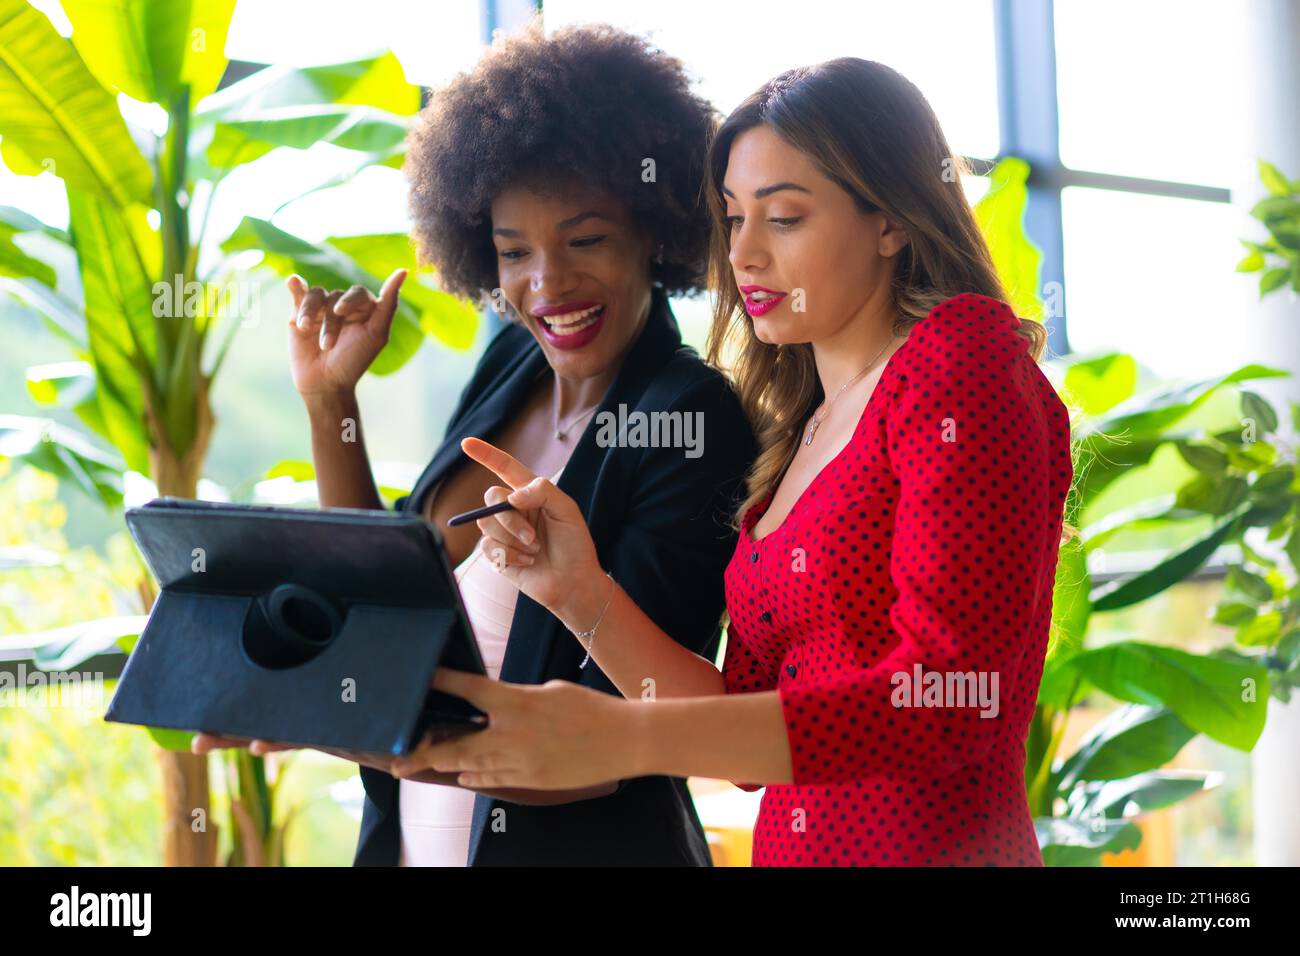 Young enterprising girls, Caucasian blonde and black skinned girl with afro hair making a work video call with a tablet. Lifestyle, working with good Stock Photo